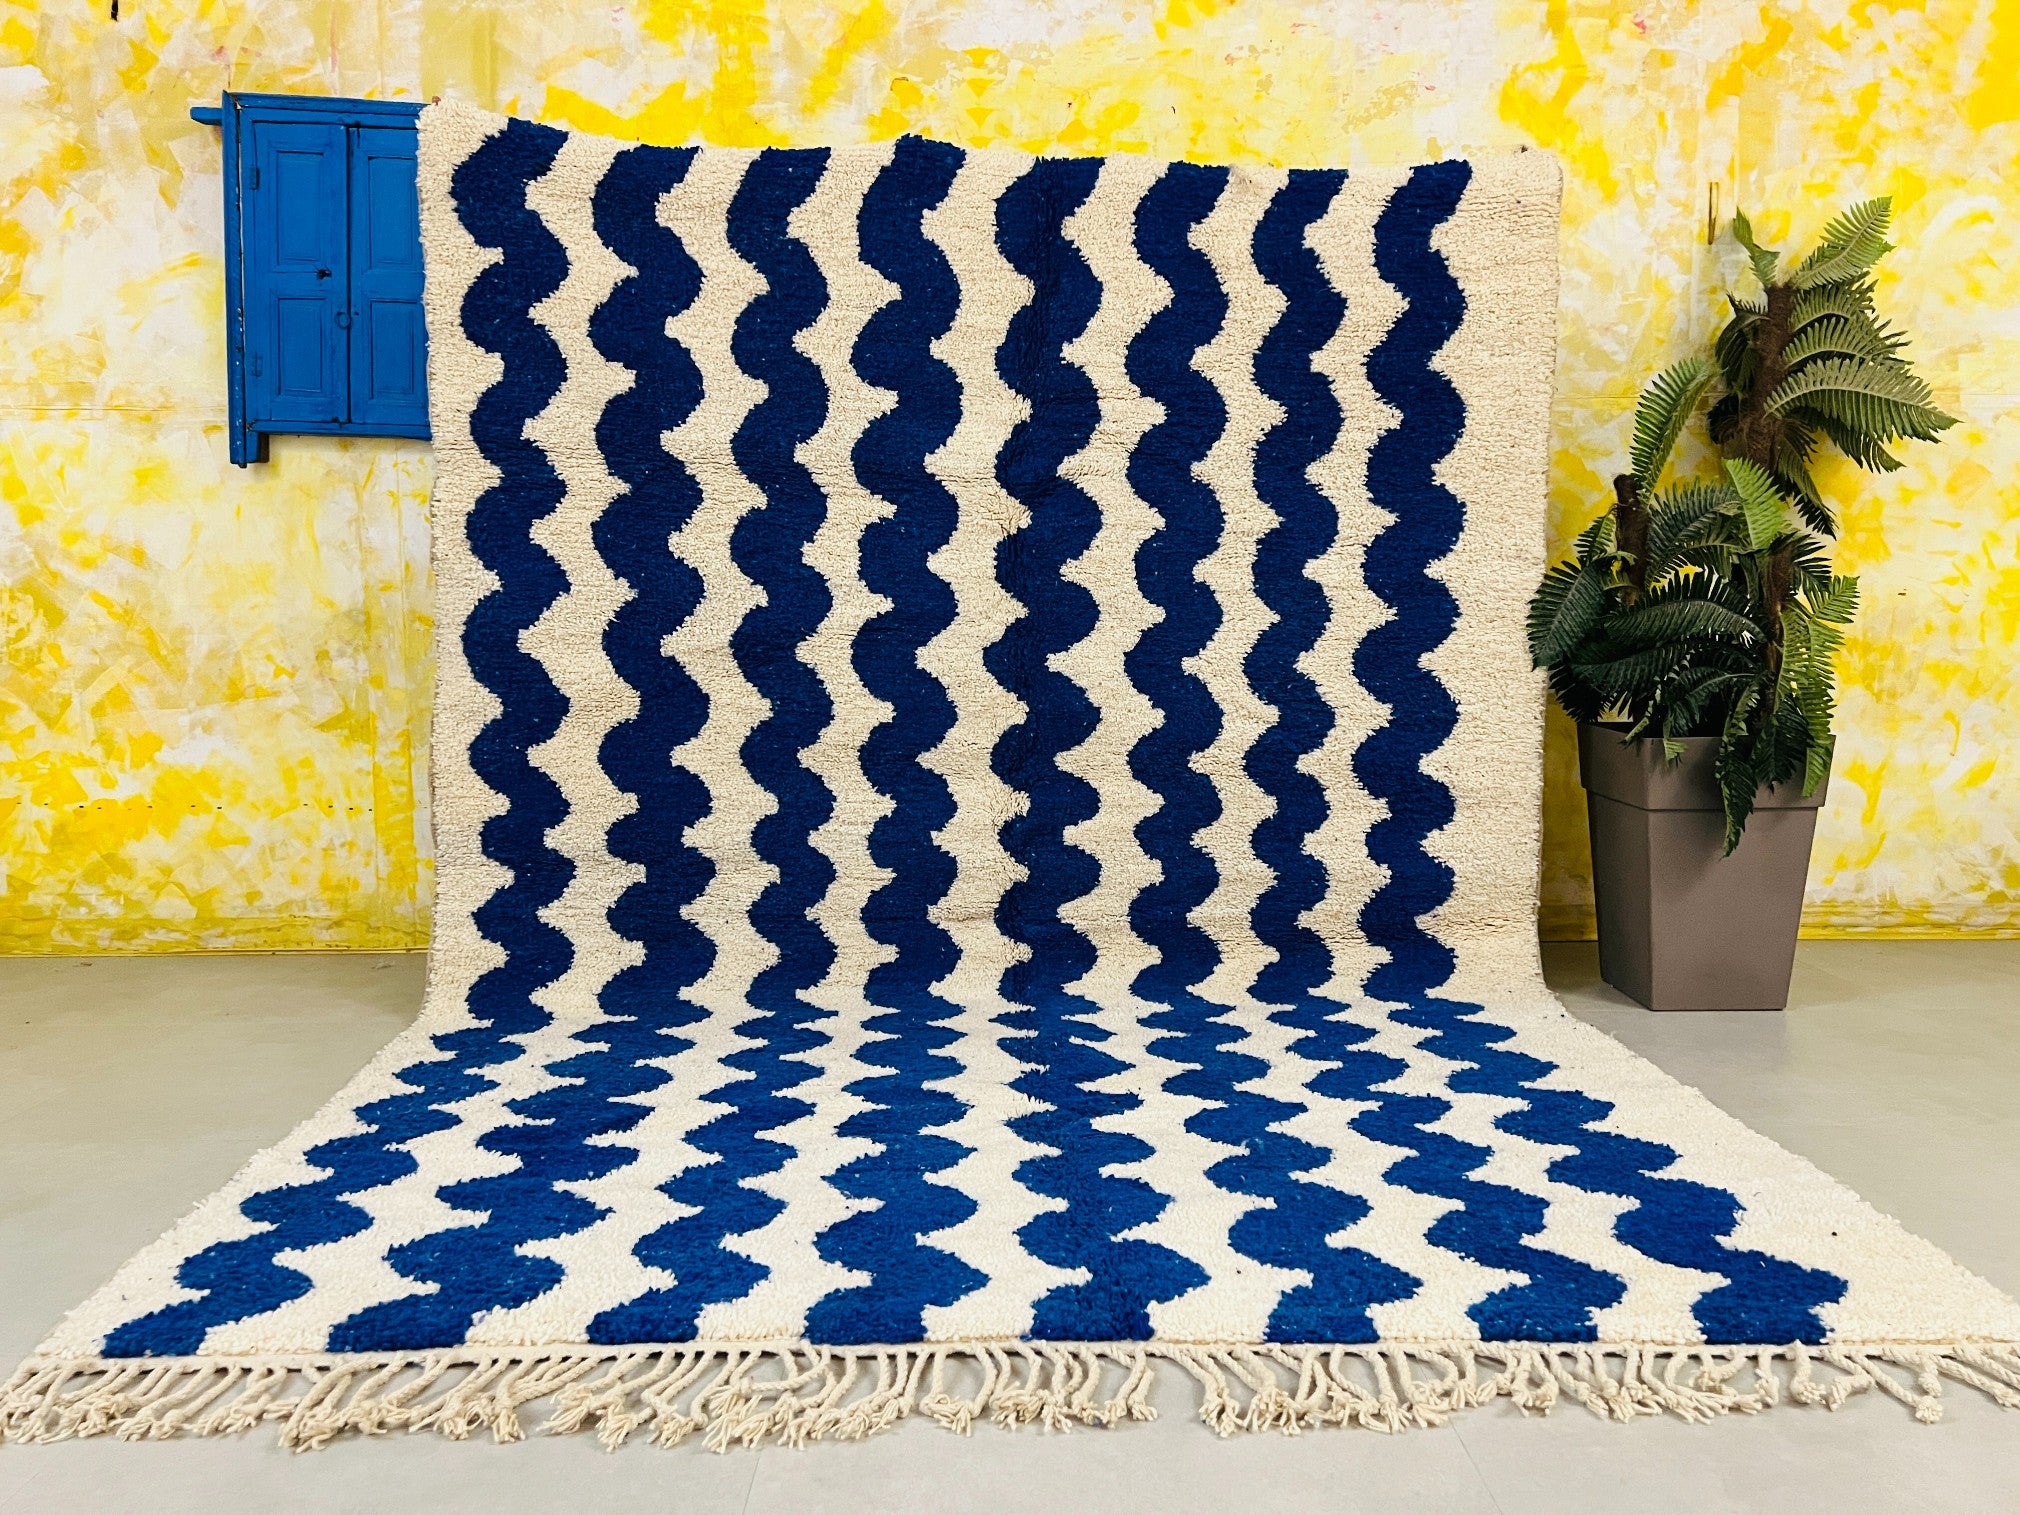 The Timeless Charm of Handmade Rugs